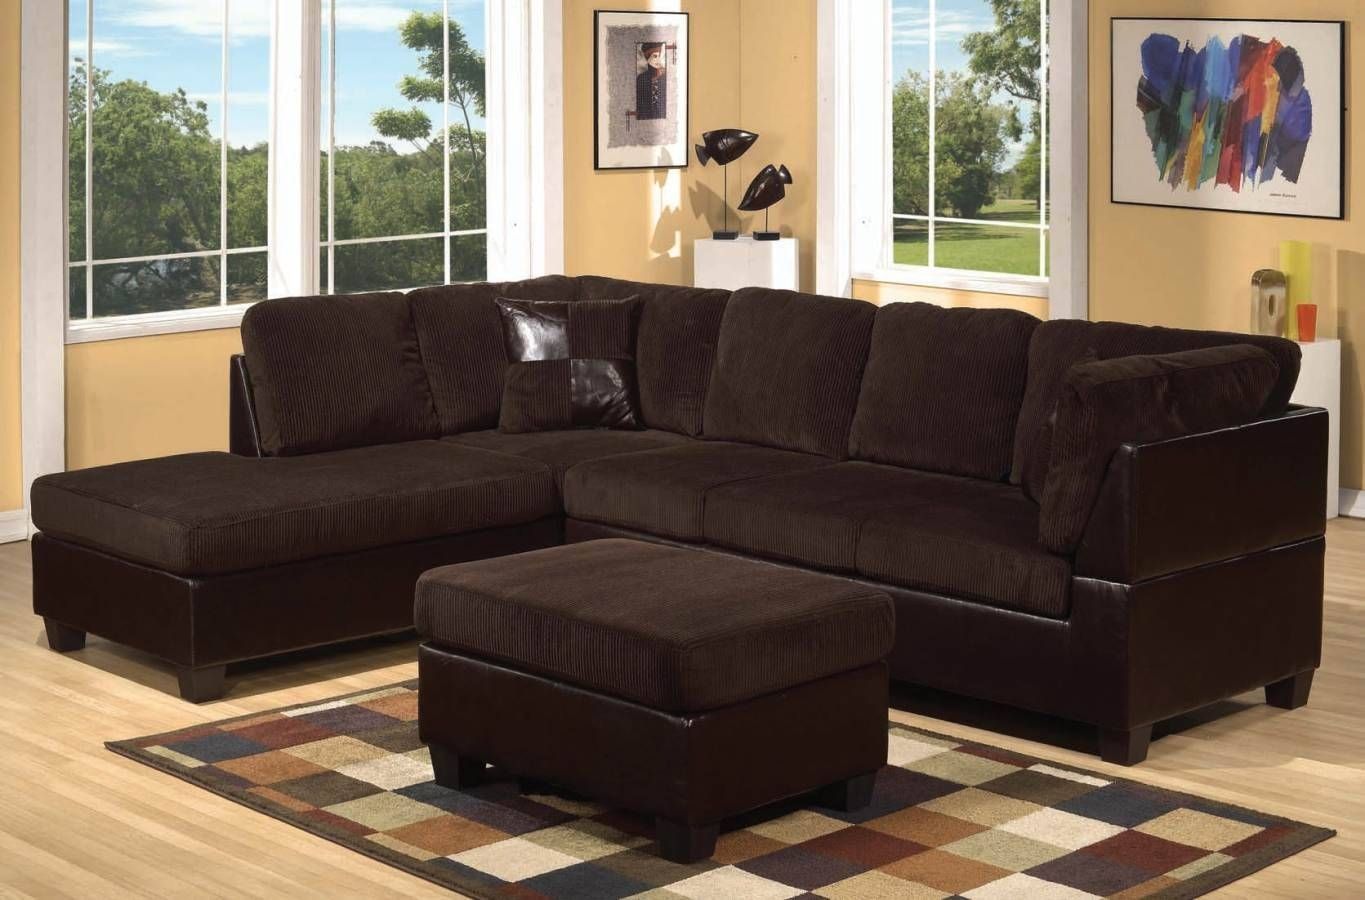 Brown Corduroy Couch : New Lighting – Trend Corduroy Couch Style Throughout Brown Corduroy Sofas (View 3 of 15)